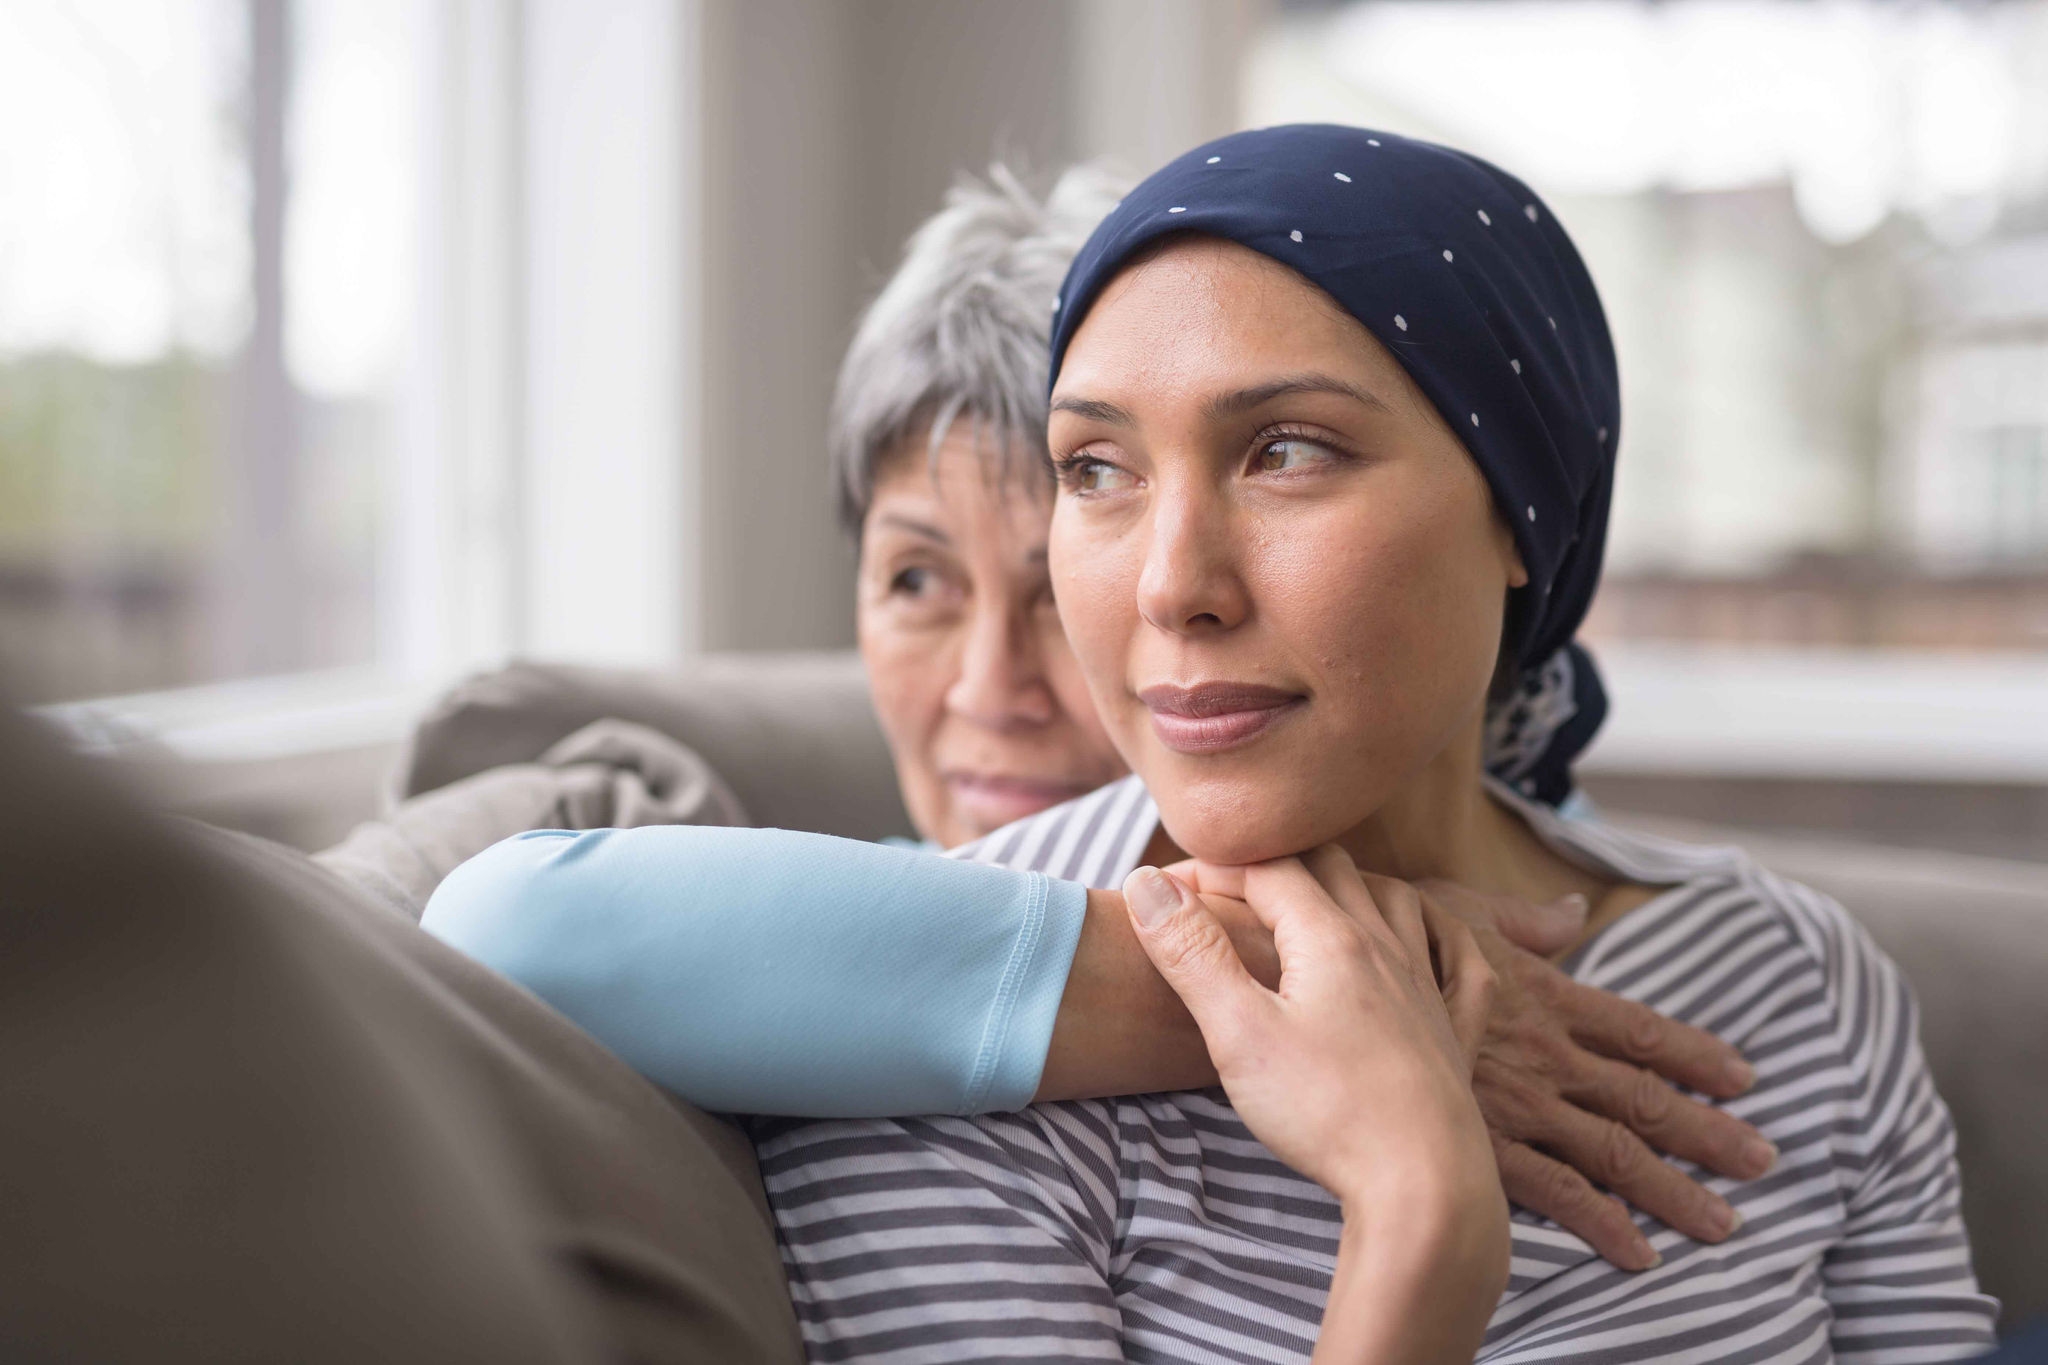 An ethnic woman wearing a headscarf and fighting cancer sits on the couch with her mother. She is in the foreground and her mom is behind her, with her arm wrapped around in an embrace, and they're both looking out the window in a quiet moment of contemplation.